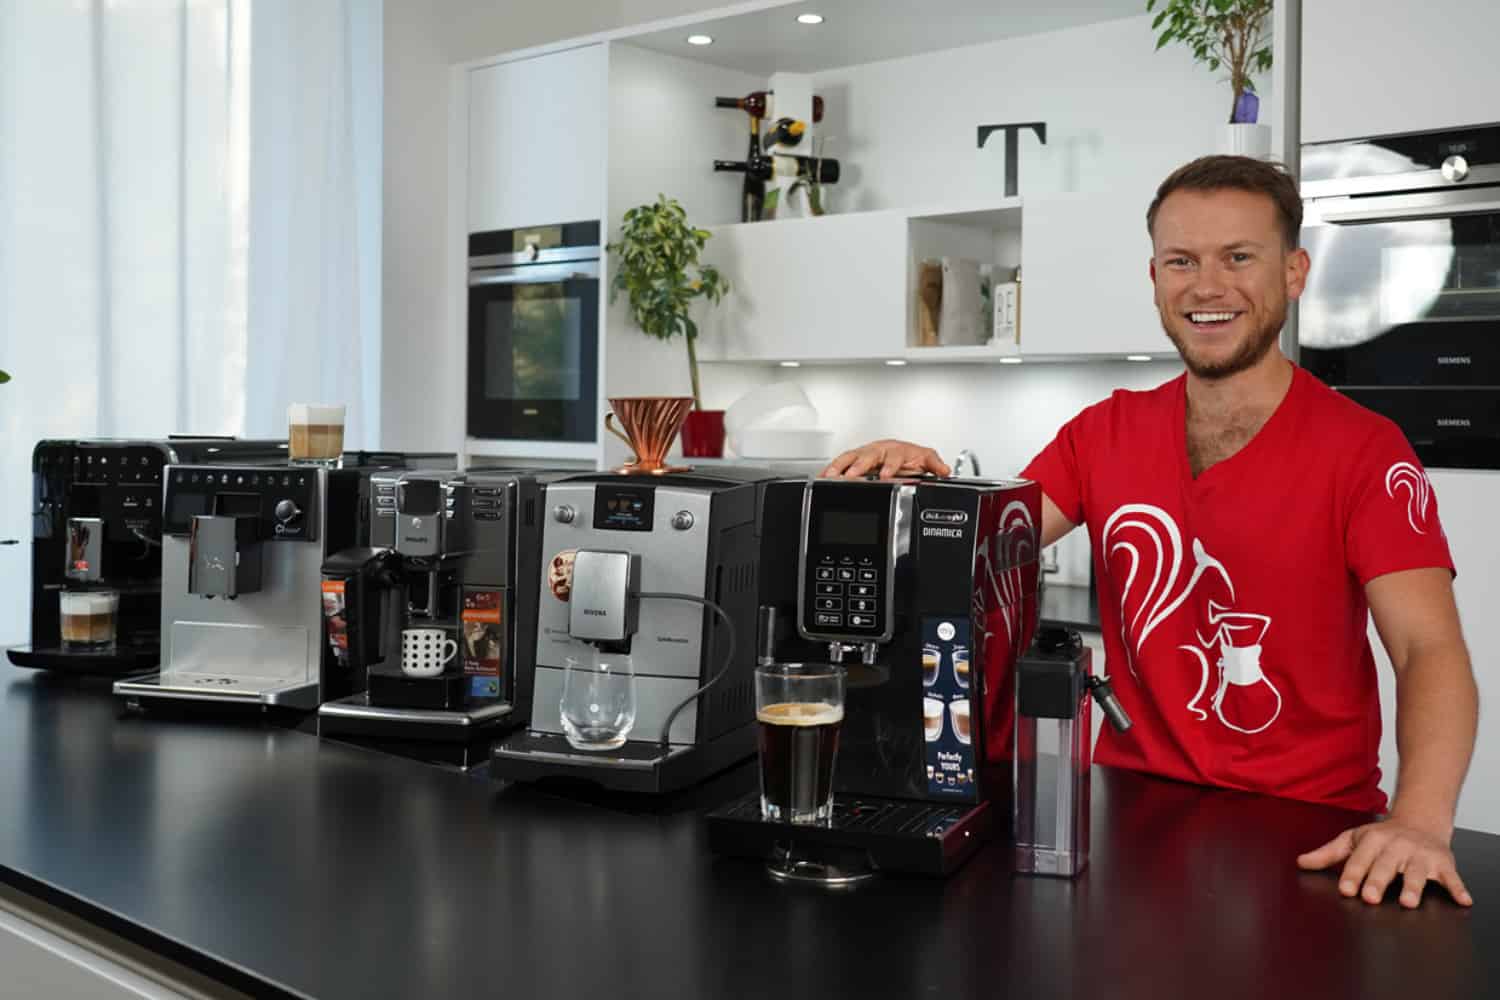 What Are The Best Automatic Espresso Machines For Home Use?